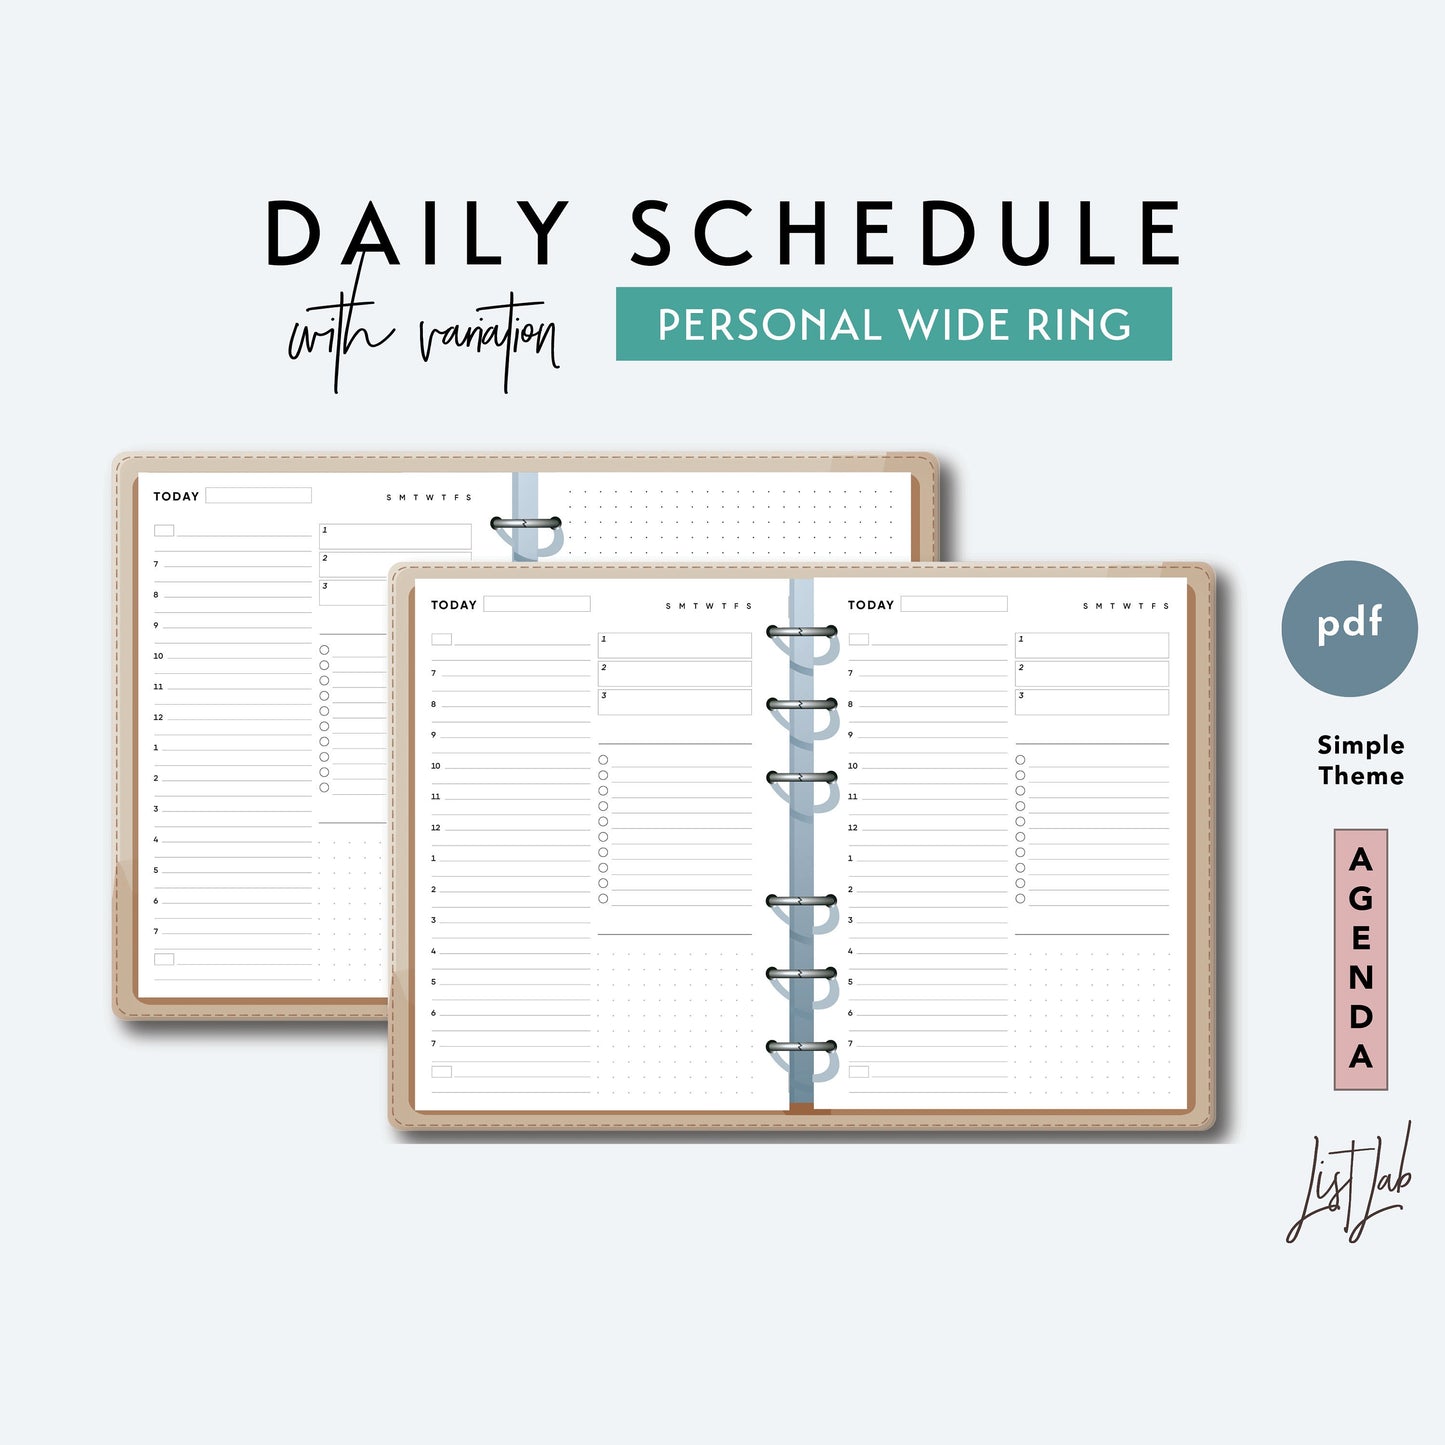 Personal Wide Ring DAILY SCHEDULE Printable Planner Insert Set